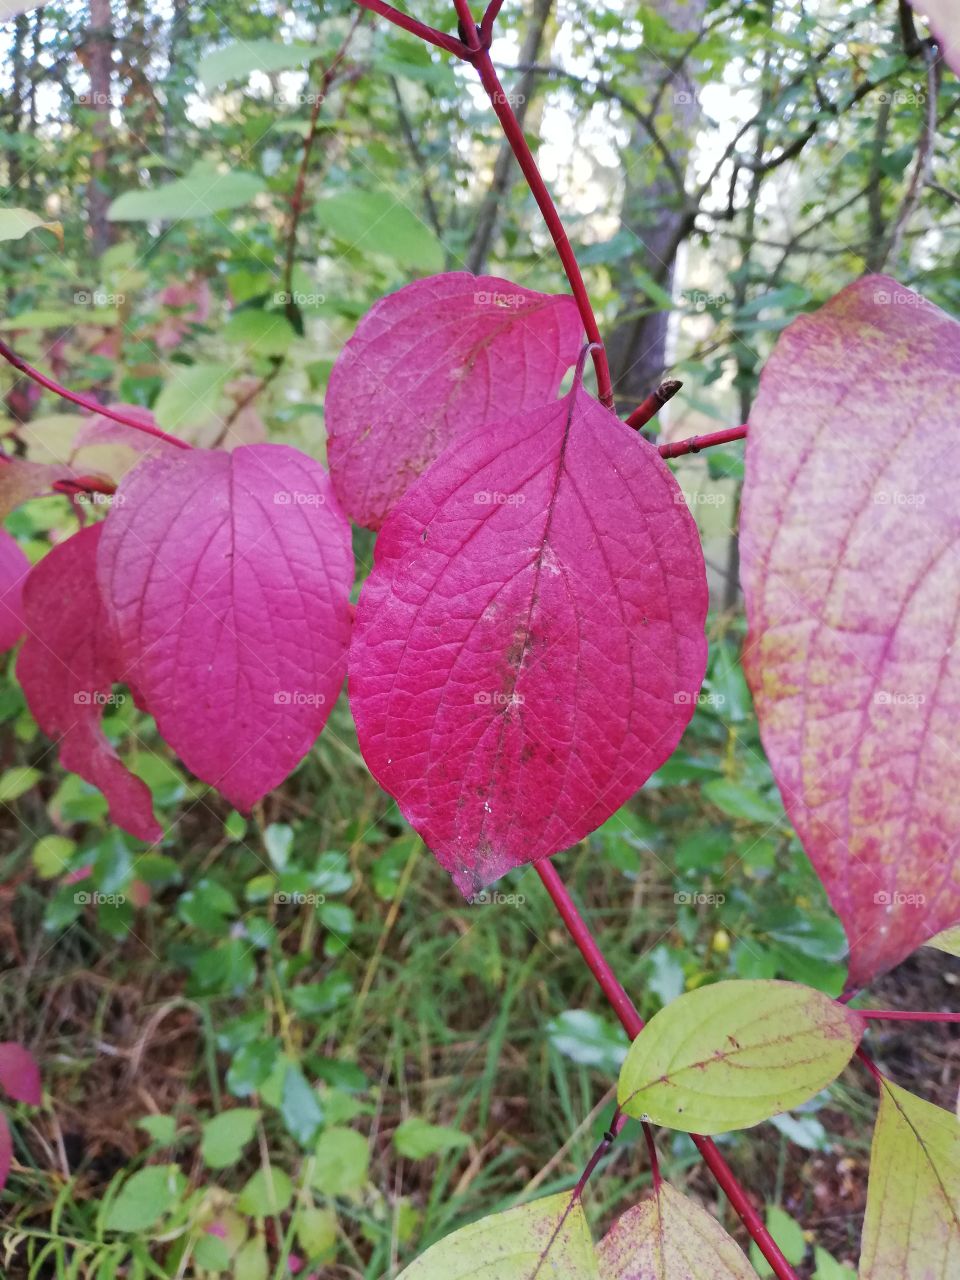 In the Autumn the shrub of dogwood is changing its color from green to pink. The leaves are complete, one in the front is a little bit damaged and dried. In the background trees and sky visible.